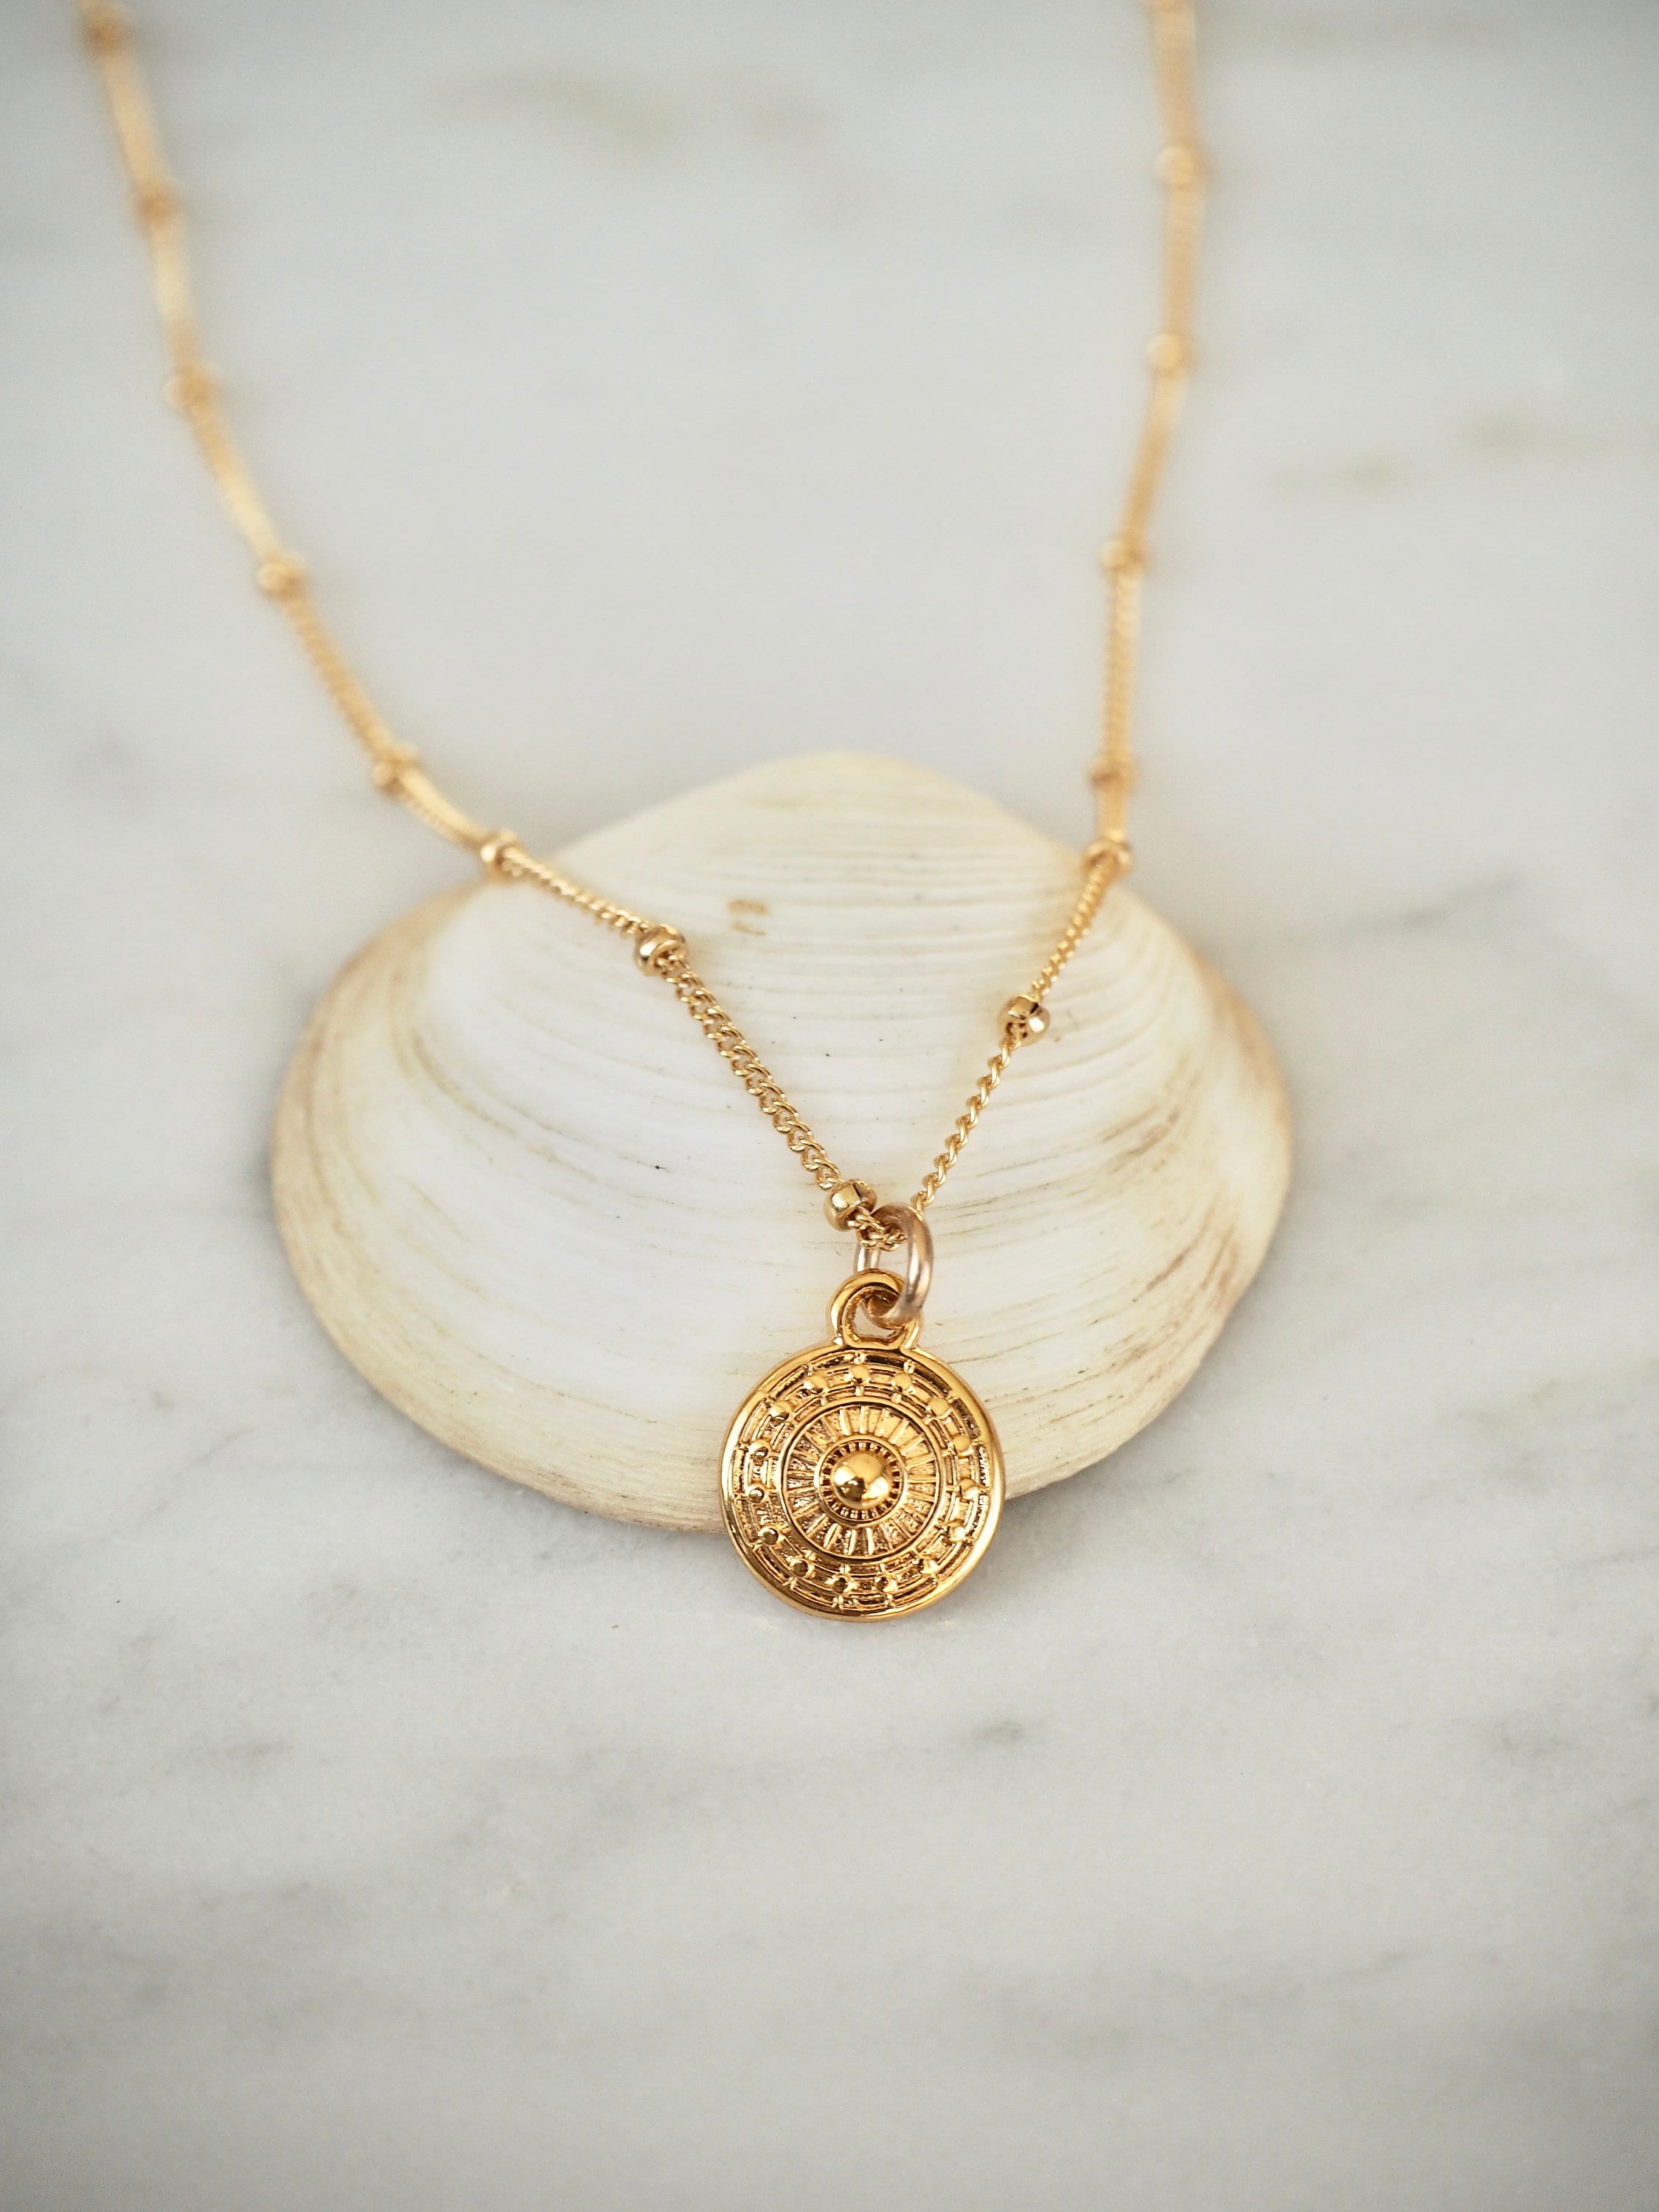 Sun Coin Charm Gold Filled Necklace Tribal Jewelry - Etsy